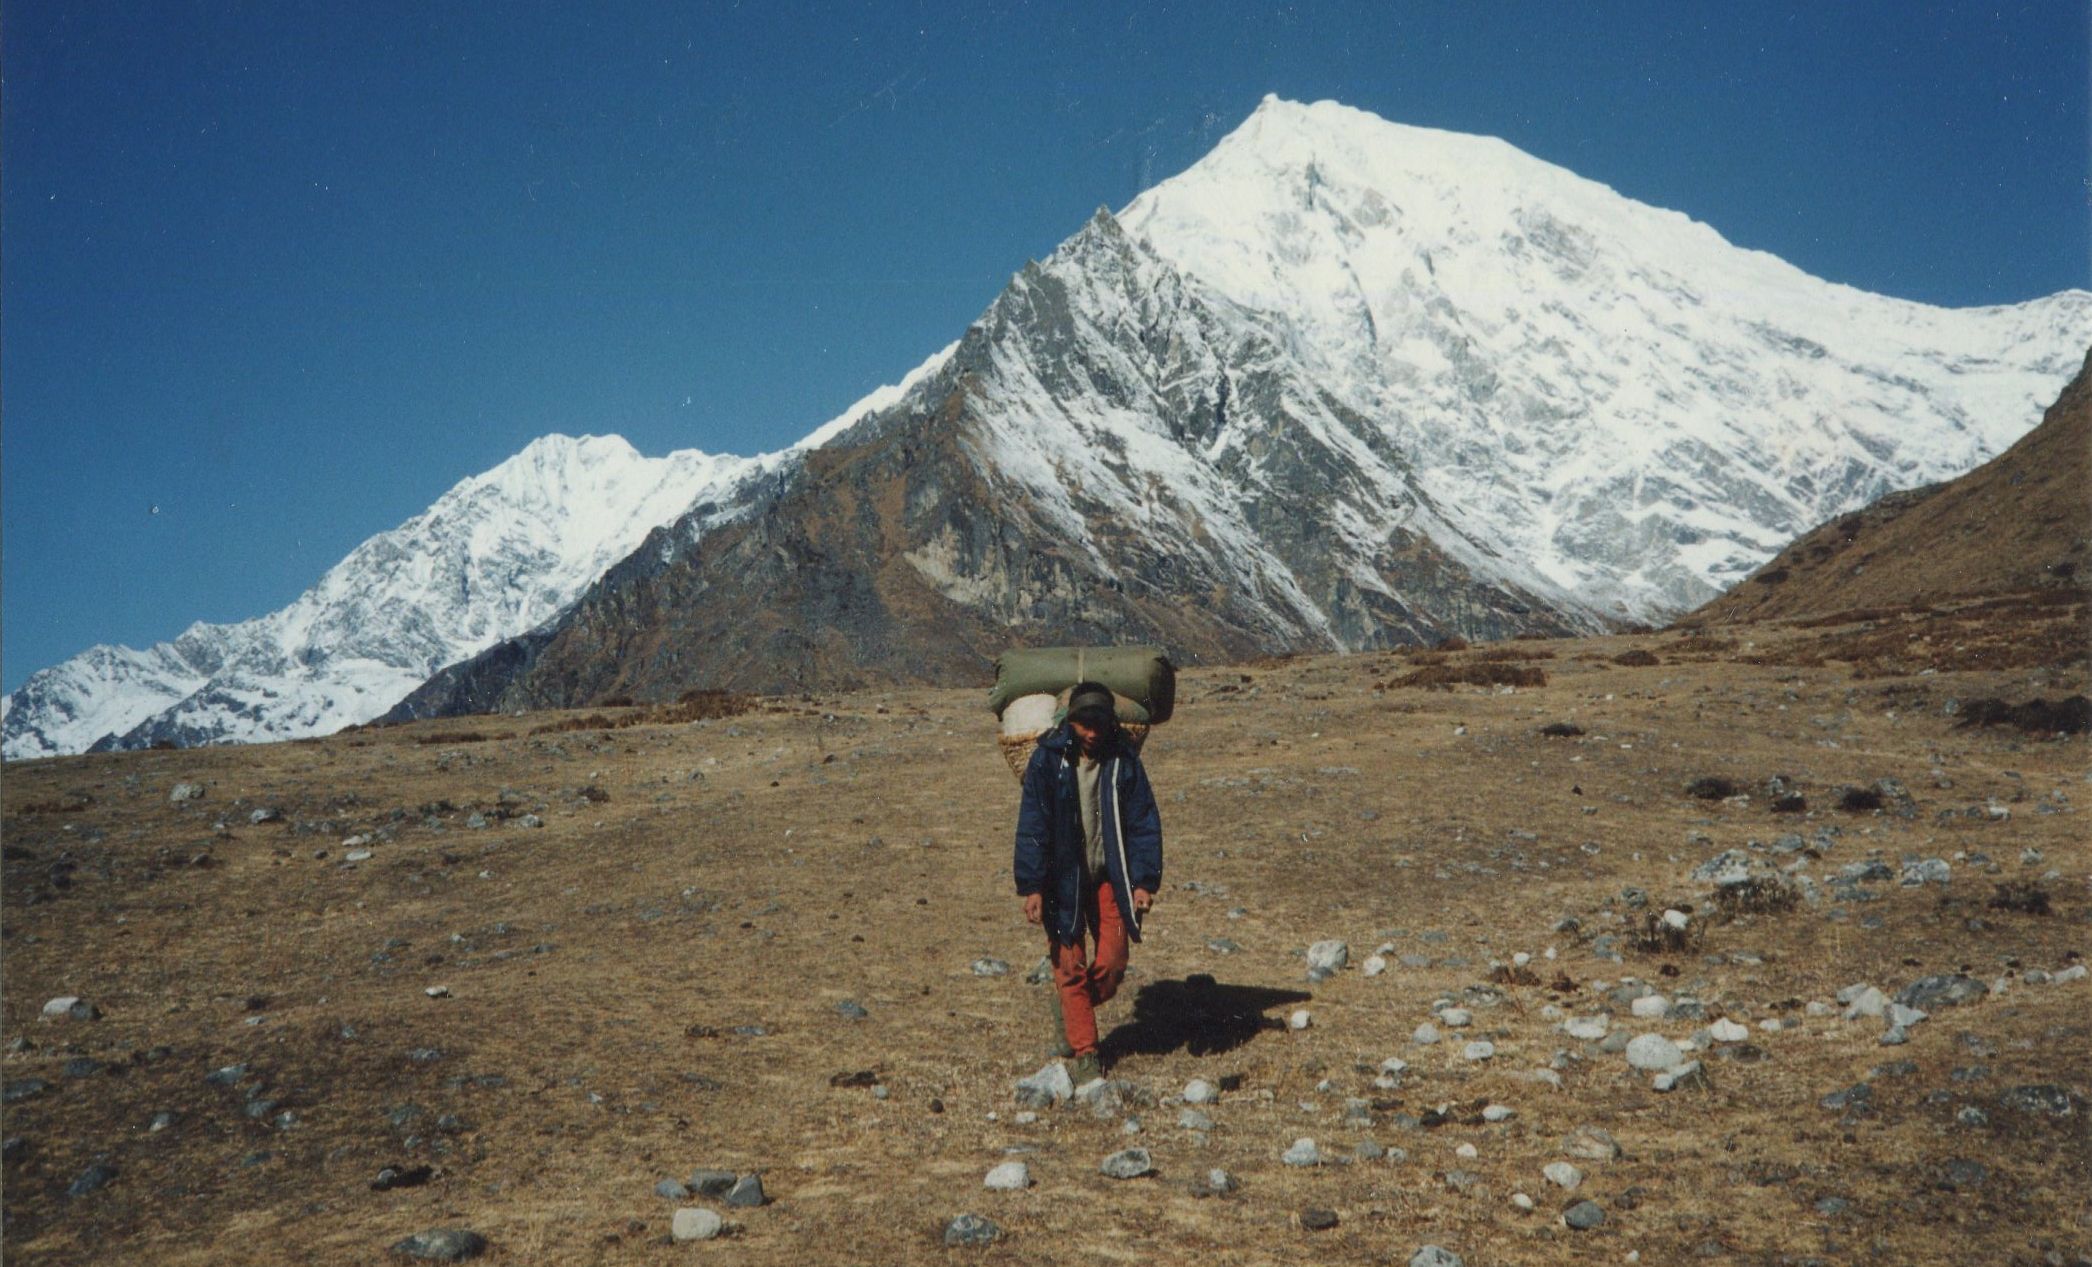 Mt.Langtang Lirung ( 7227m ) on ascent to Yala in the Langtang Valley